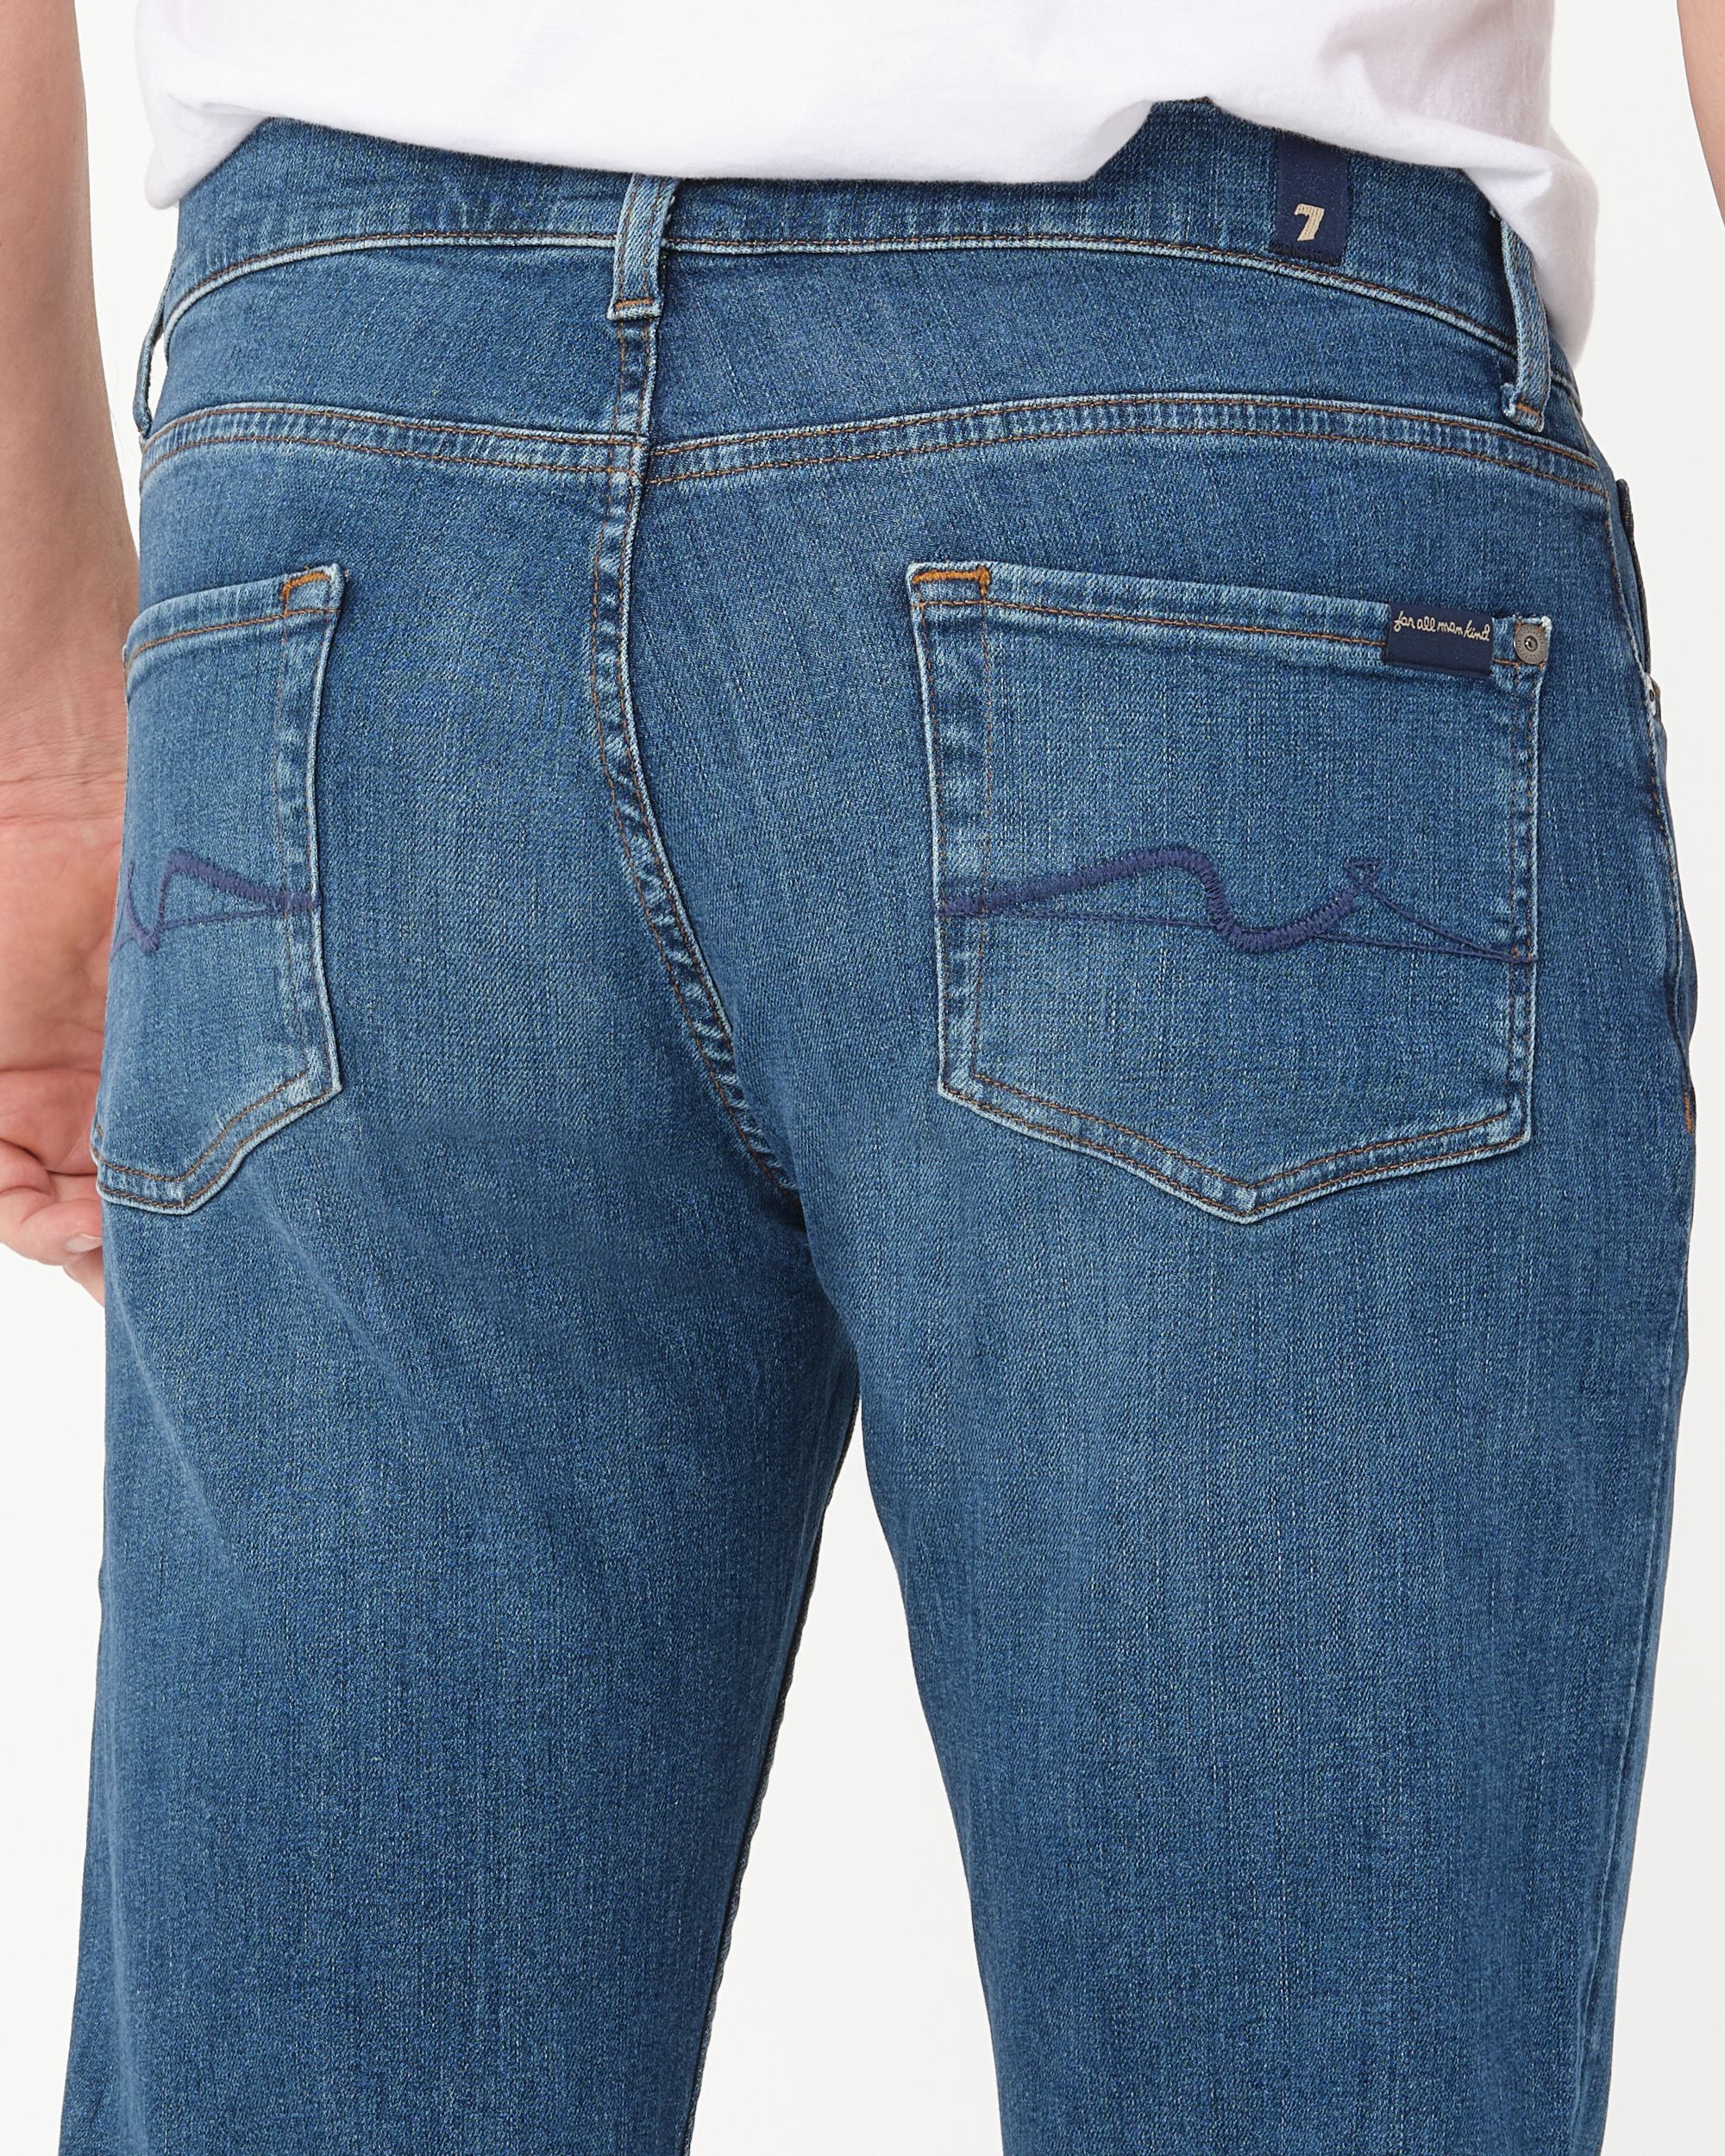 Seven for all mankind Jeans Blauw 091551-001-30